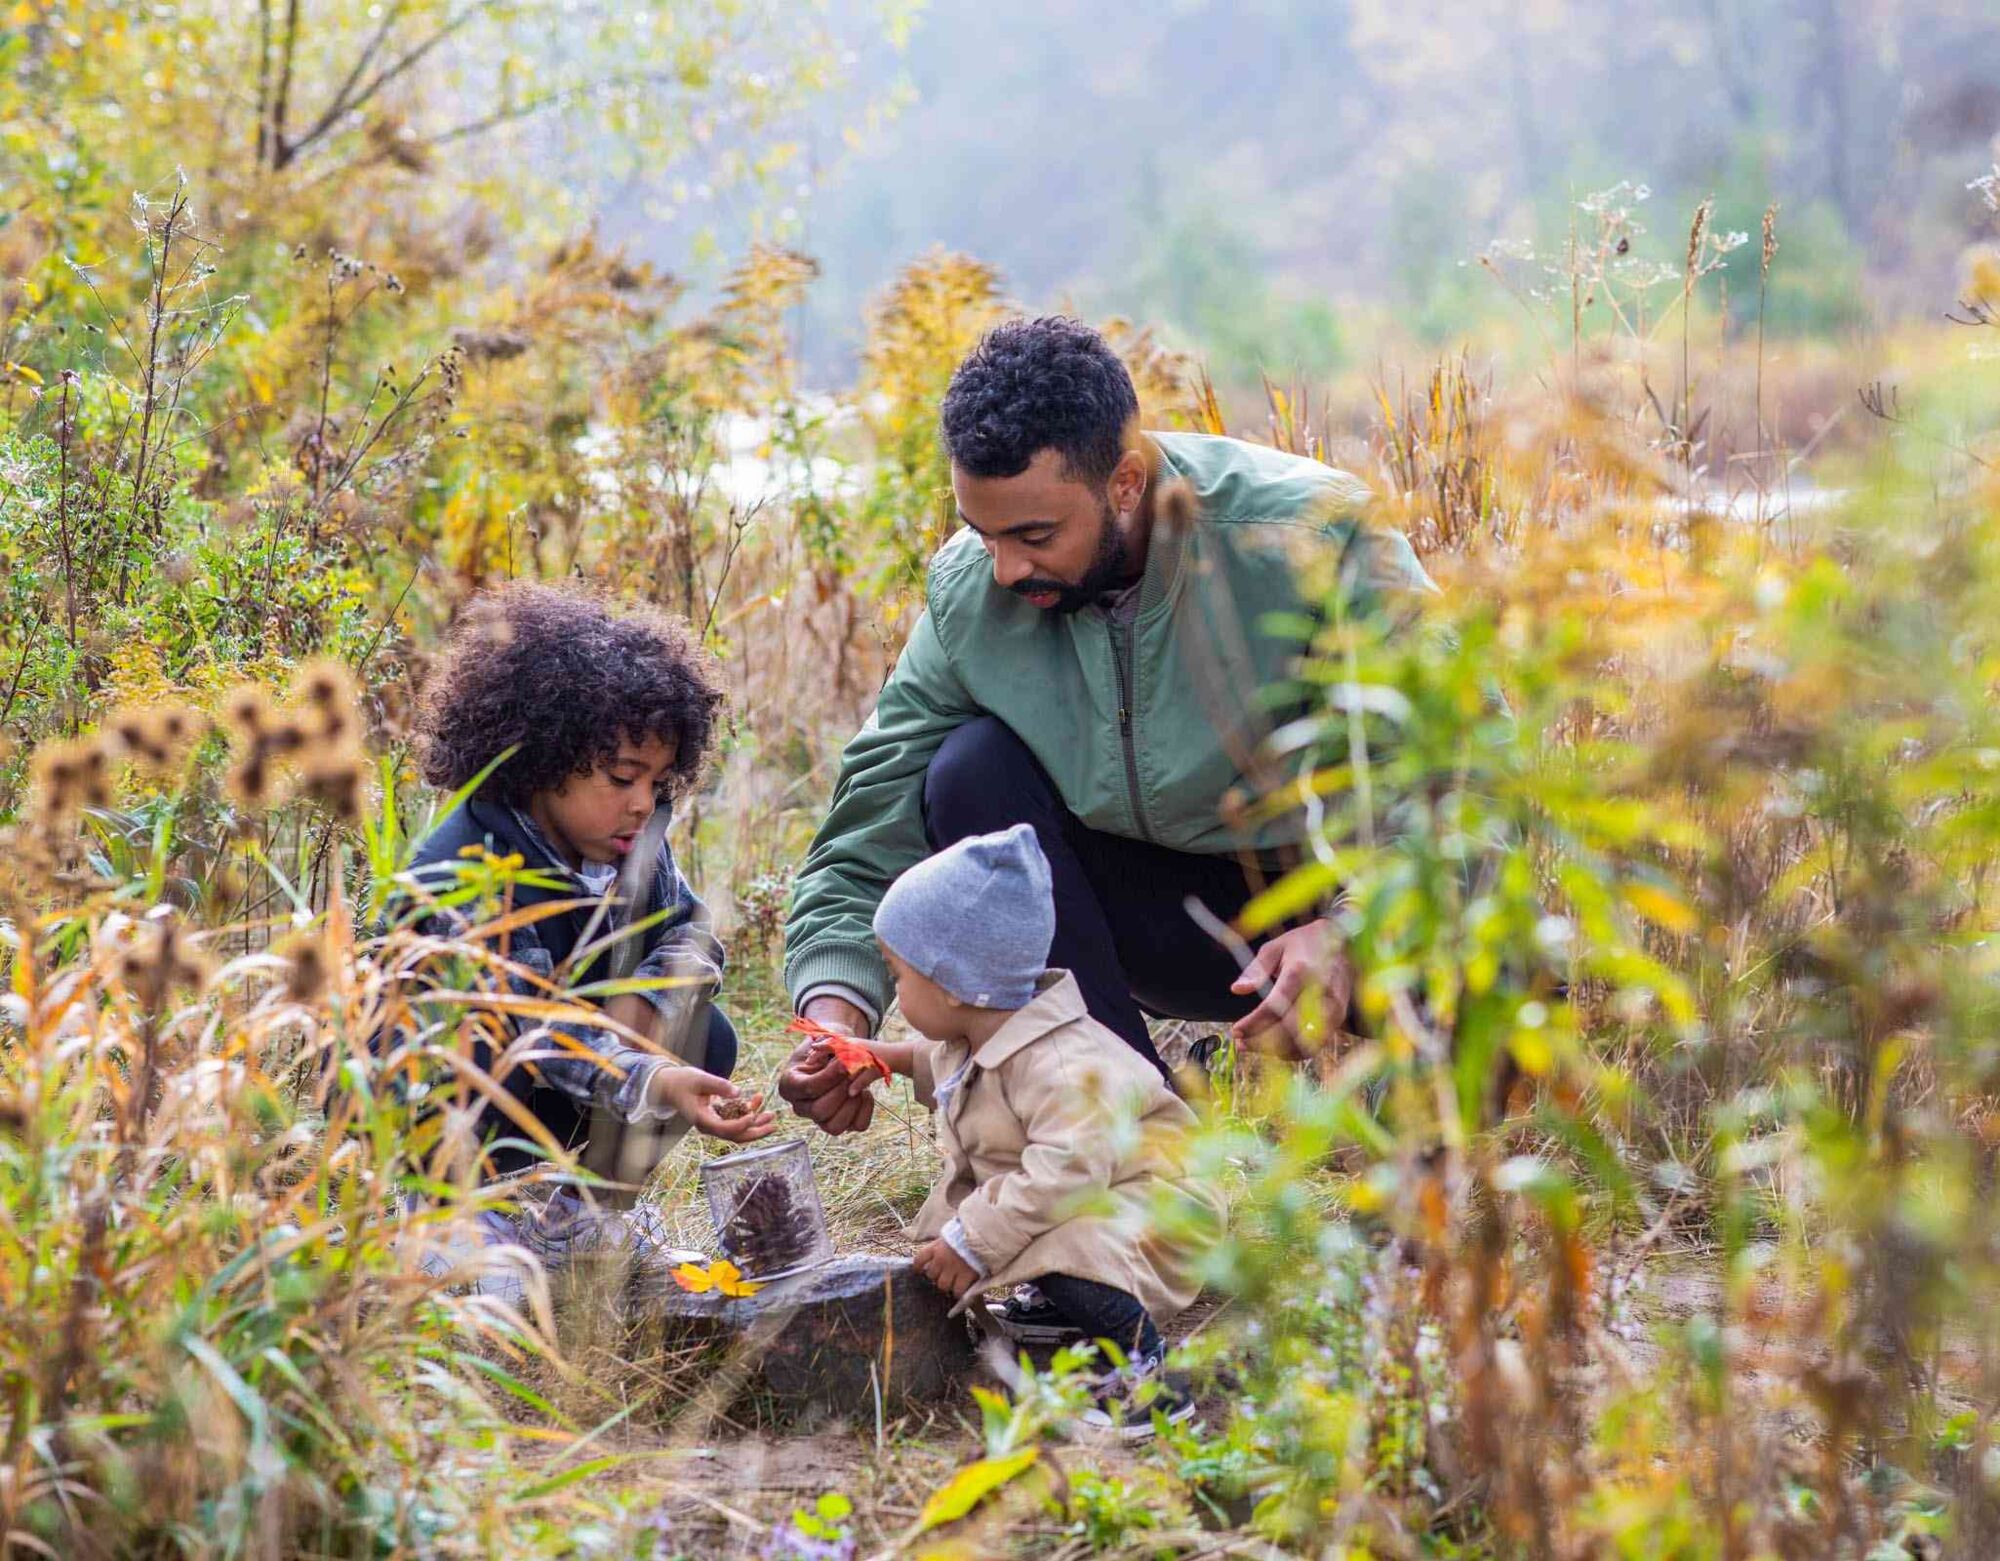 man and two young children playing outdoors in nature